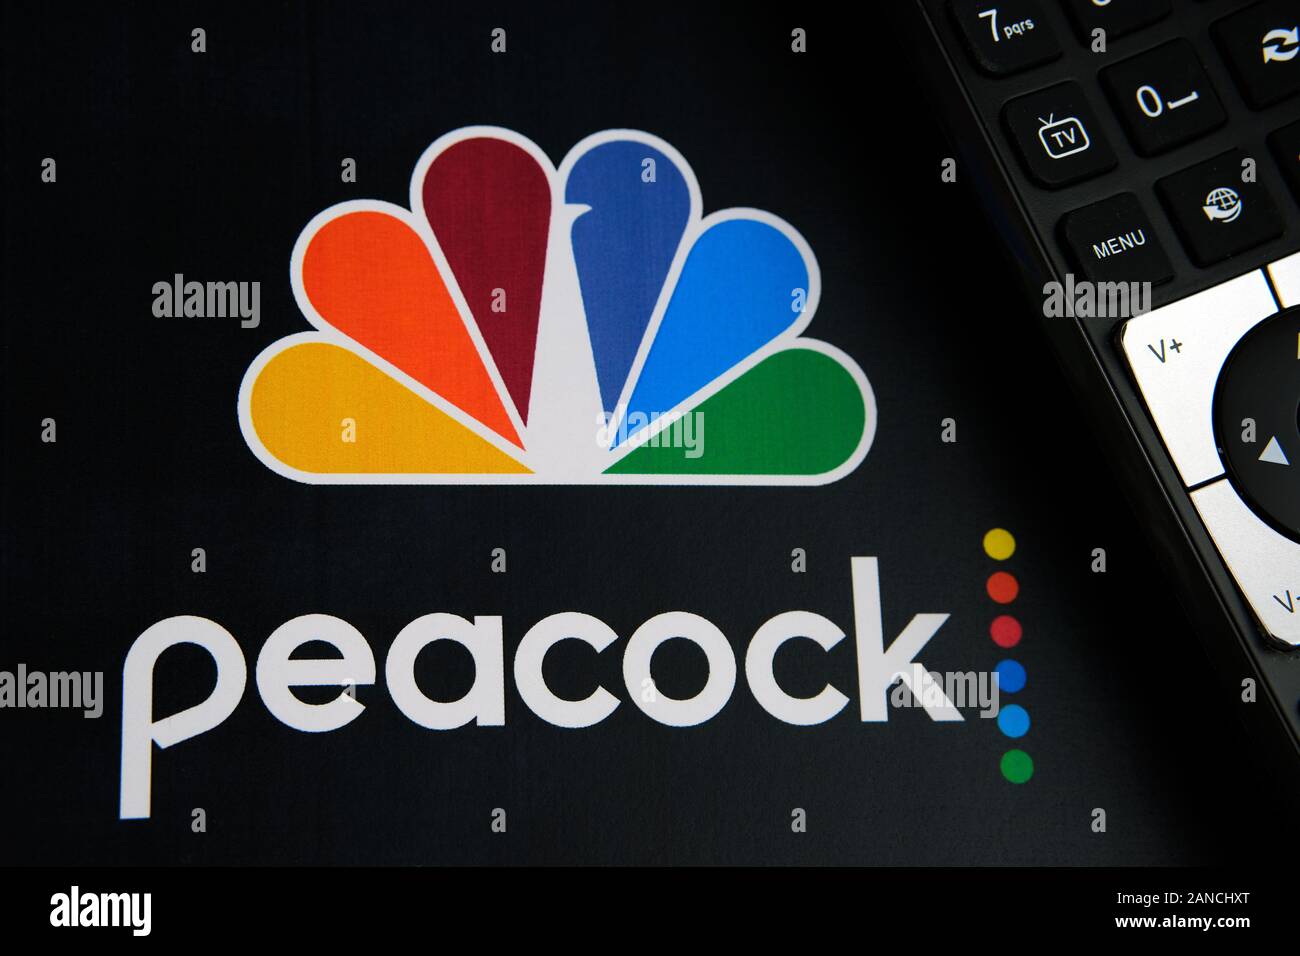 Peacock video streaming service logo on the paper brochure and the remote control next to it. By NBCUniversal, a subsidiary of Comcast. Stock Photo